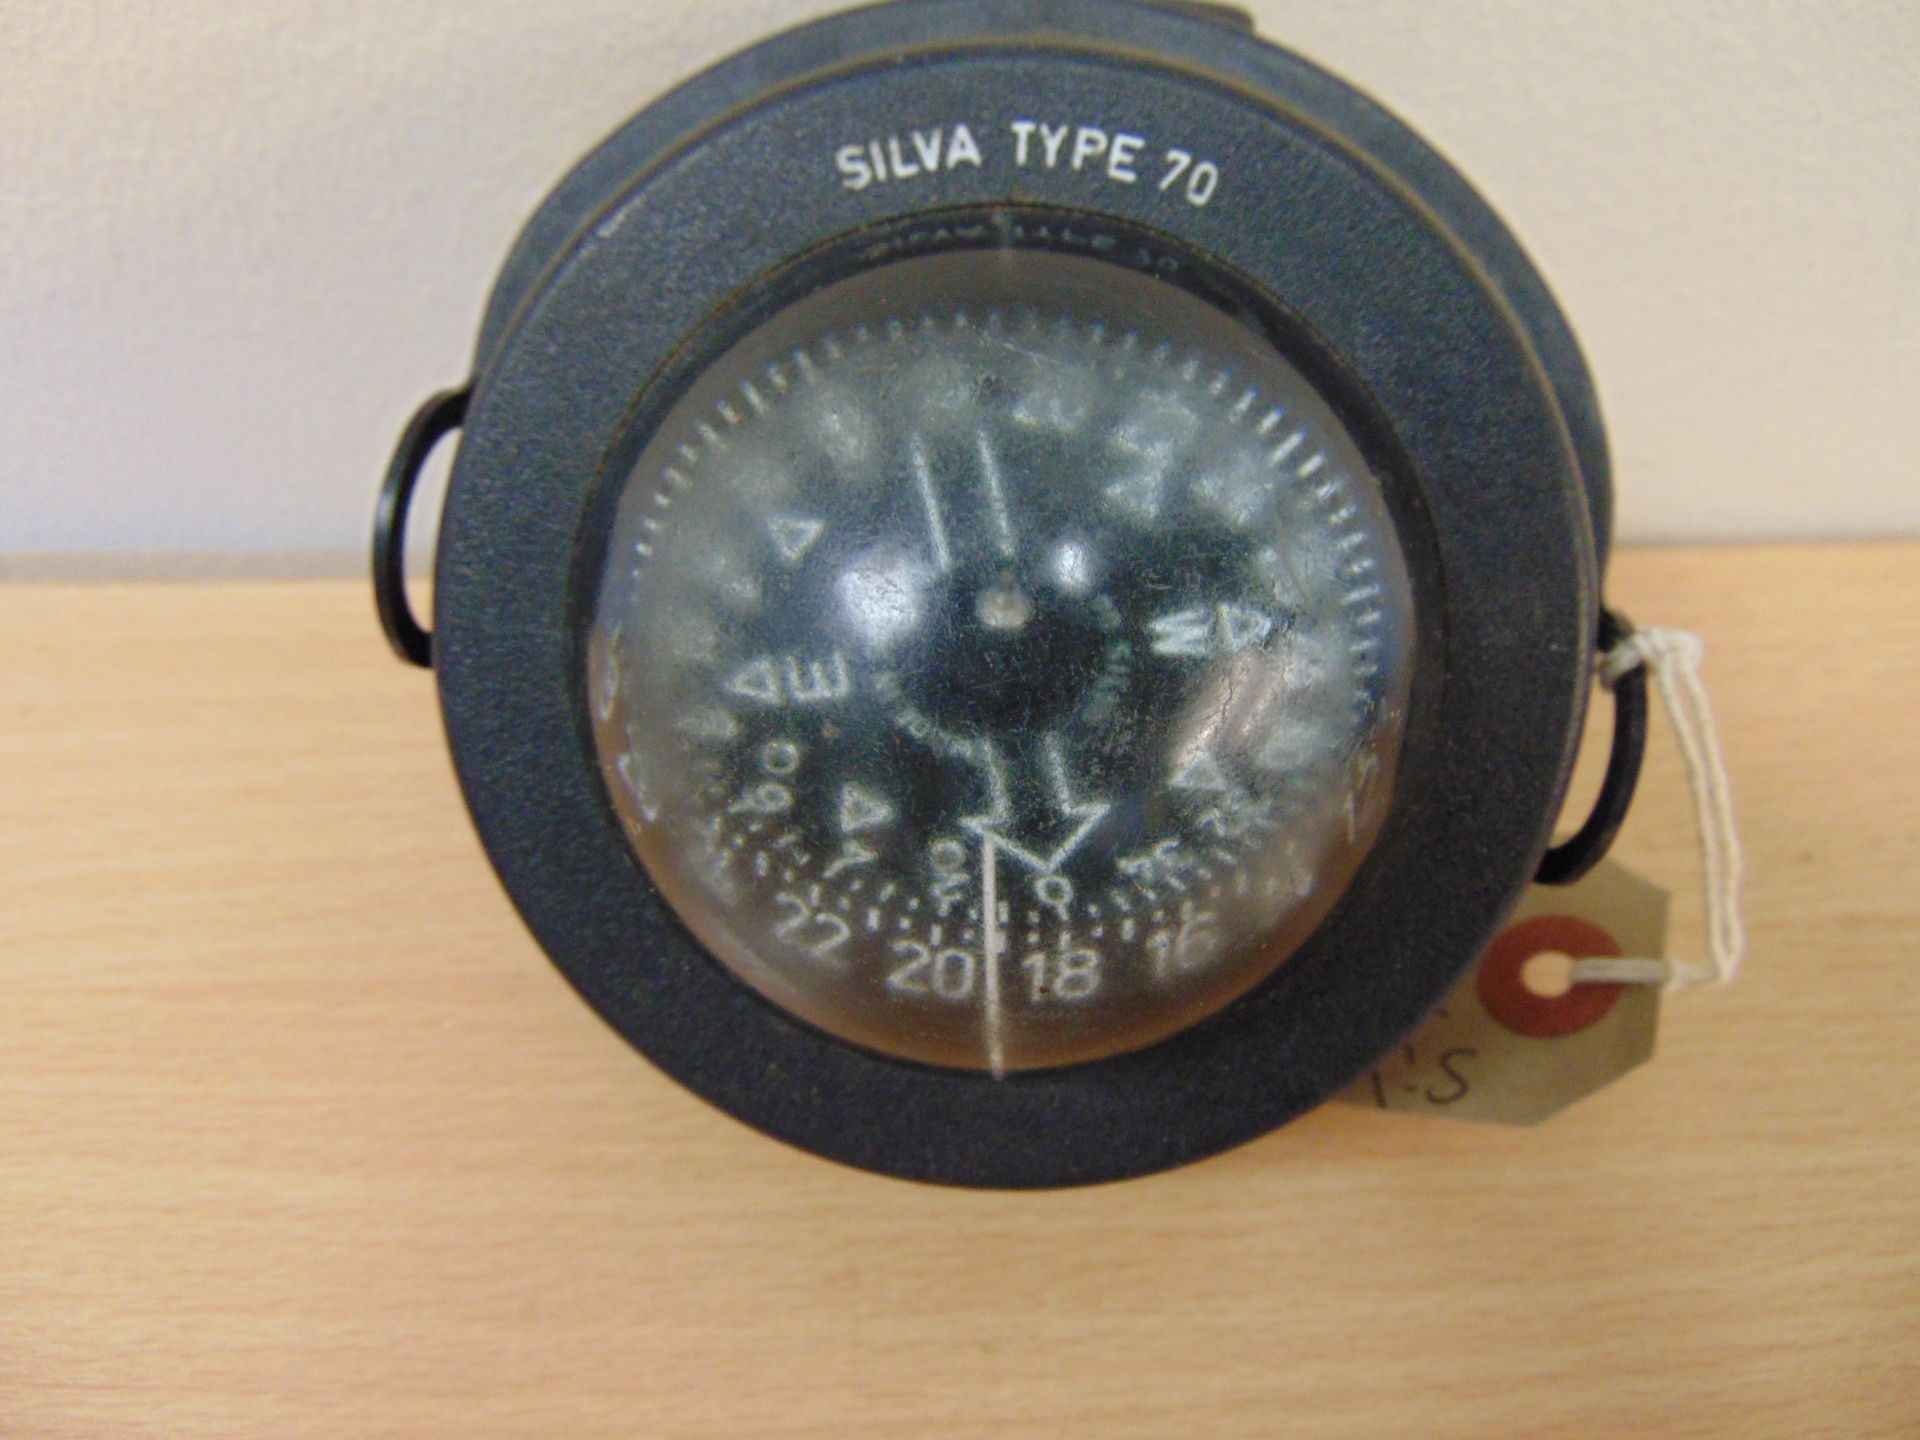 Silva Type 70 Boat Compass - Image 4 of 5